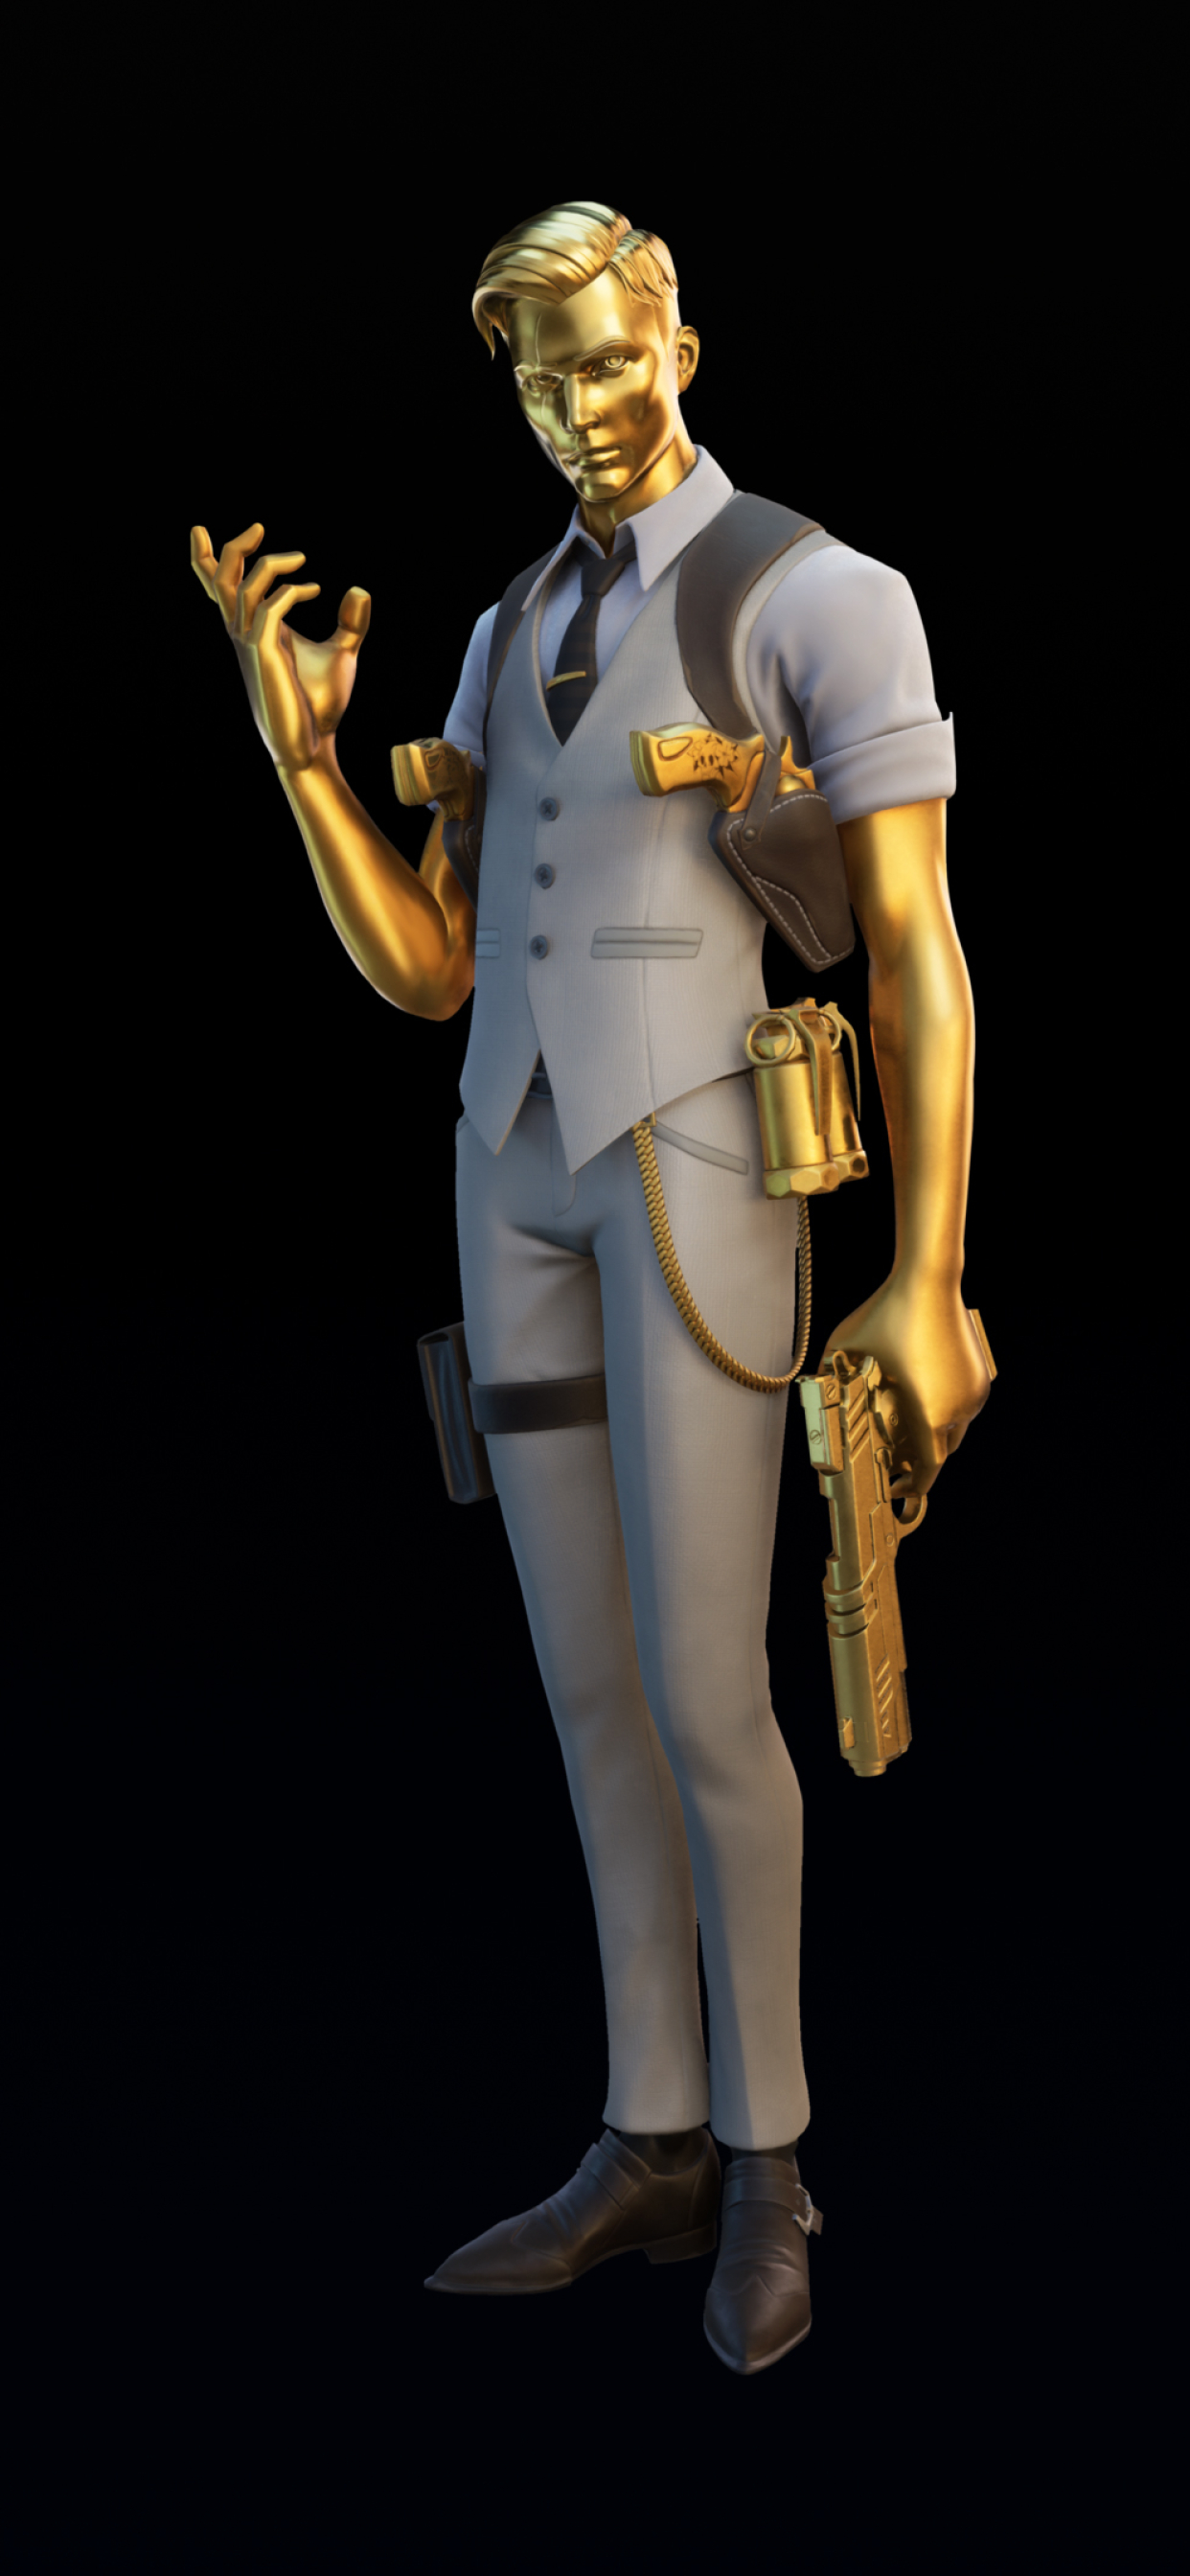 1242x2688 Ghost Midas Fortnite Chapter 2 Iphone Xs Max Wallpaper Hd Games 4k Wallpapers Images Photos And Background